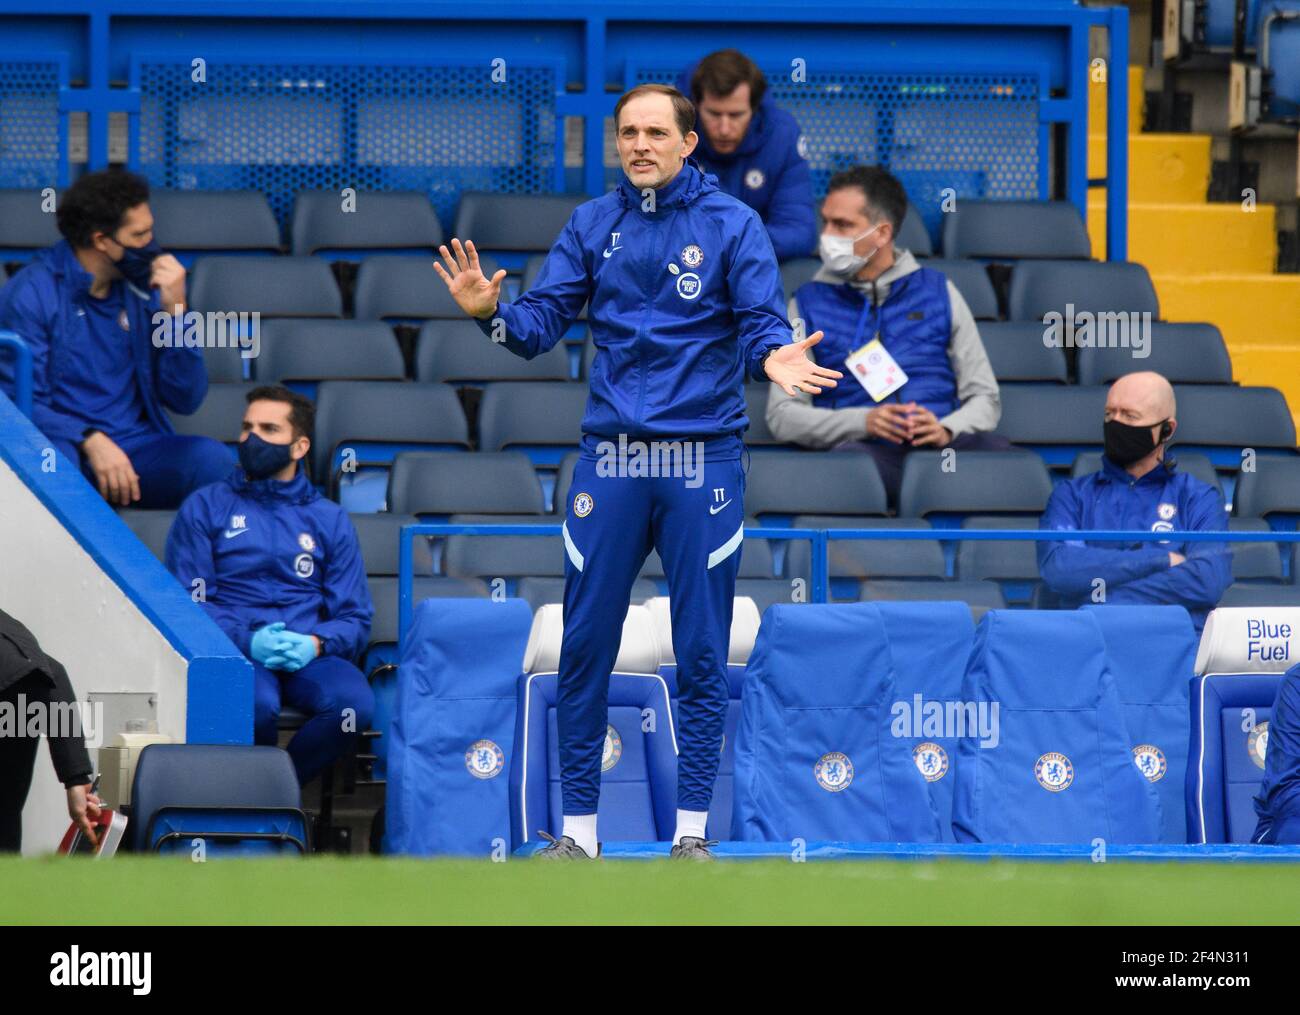 Stamford Bridge, London, 21 Mar 2021  Chelsea's Head Coach Thomas Tuchel during their FA Cup match against Sheffield United Picture Credit : © Mark Pain / Alamy Live News Stock Photo